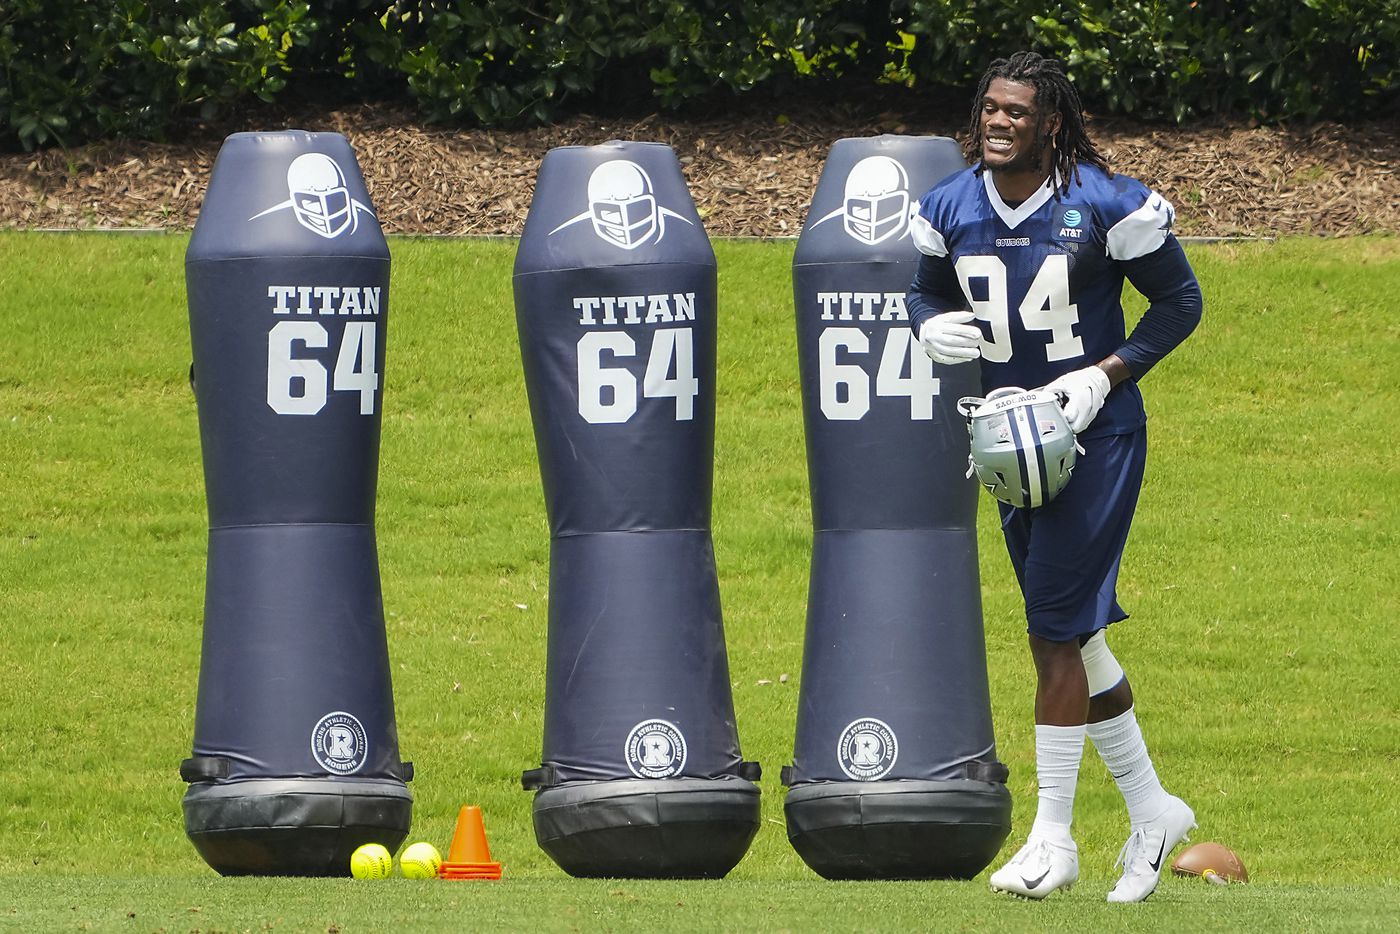 Dallas Cowboys defensive end Randy Gregory runs between drills during a minicamp practice at The Star on Tuesday, June 8, 2021, in Frisco. (Smiley N. Pool/The Dallas Morning News)